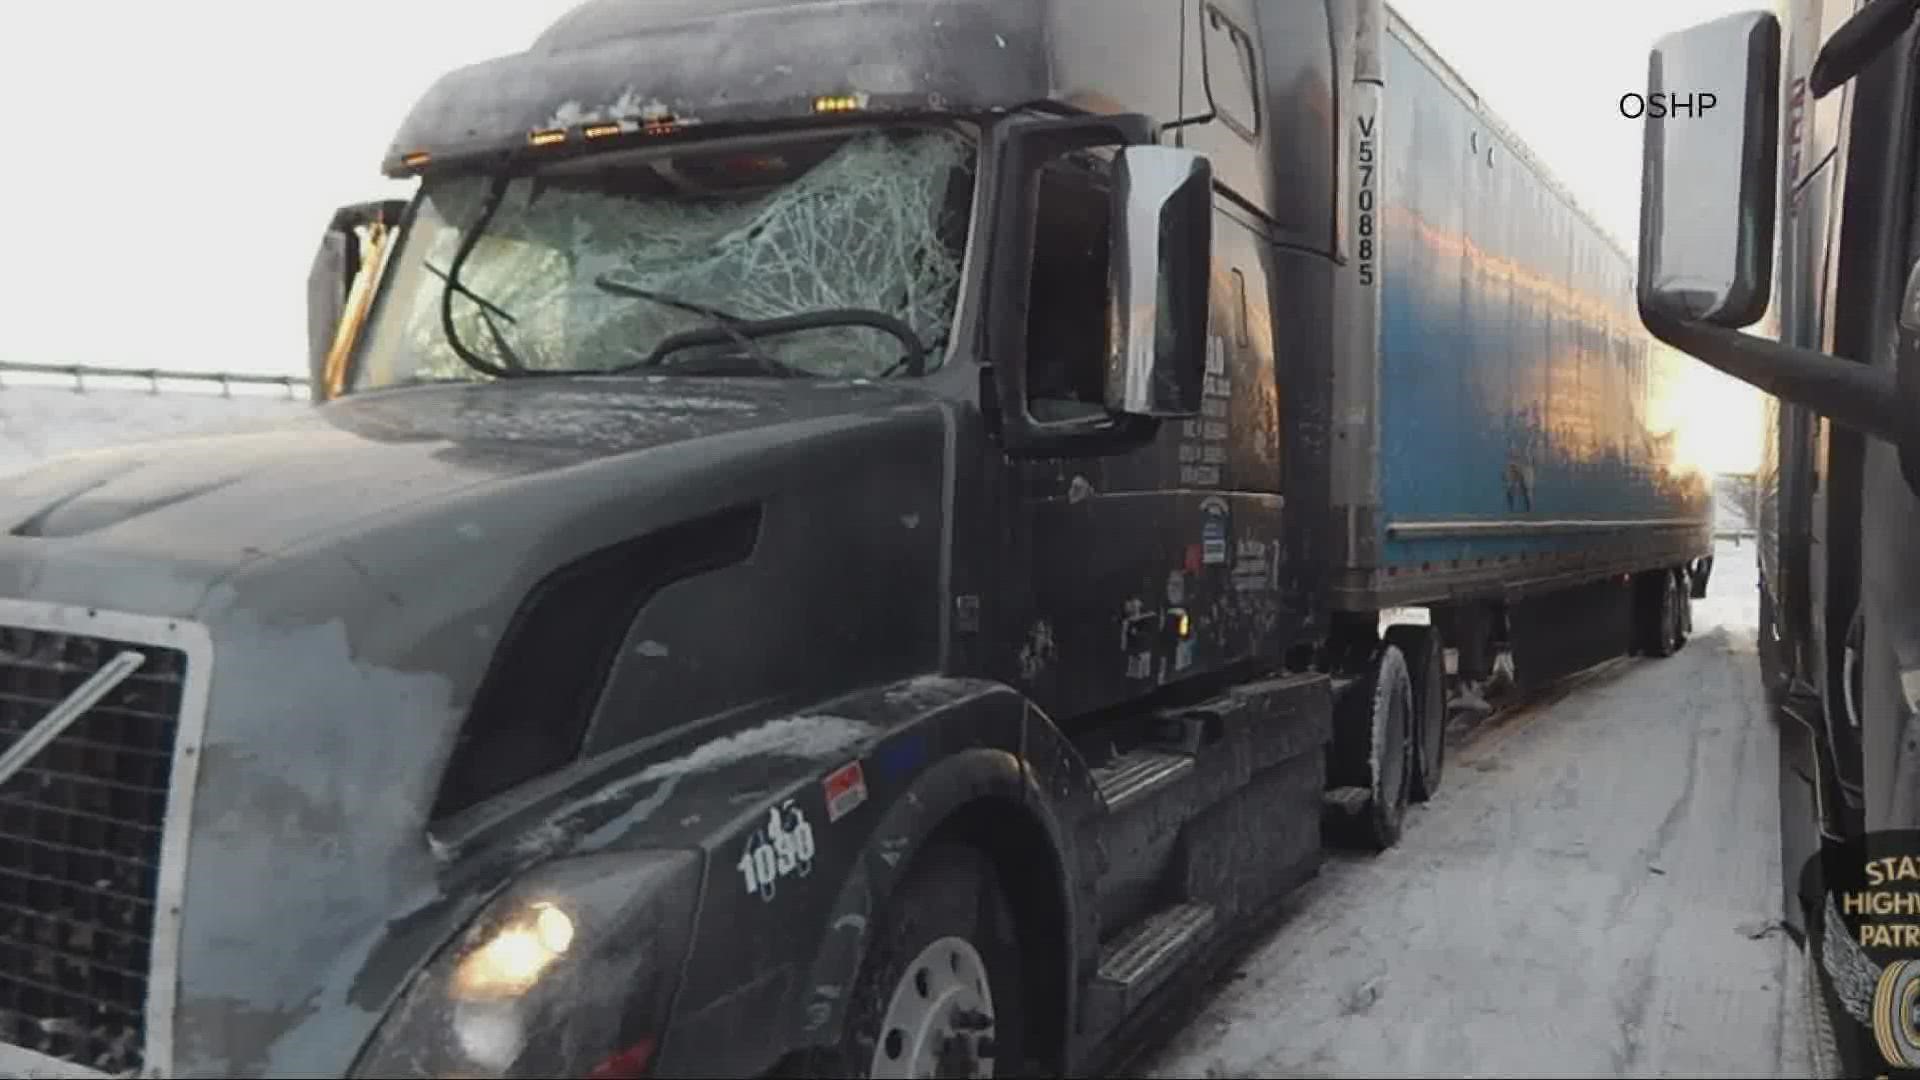 Cleveland snow plow truck involved in fatal accident wkyc